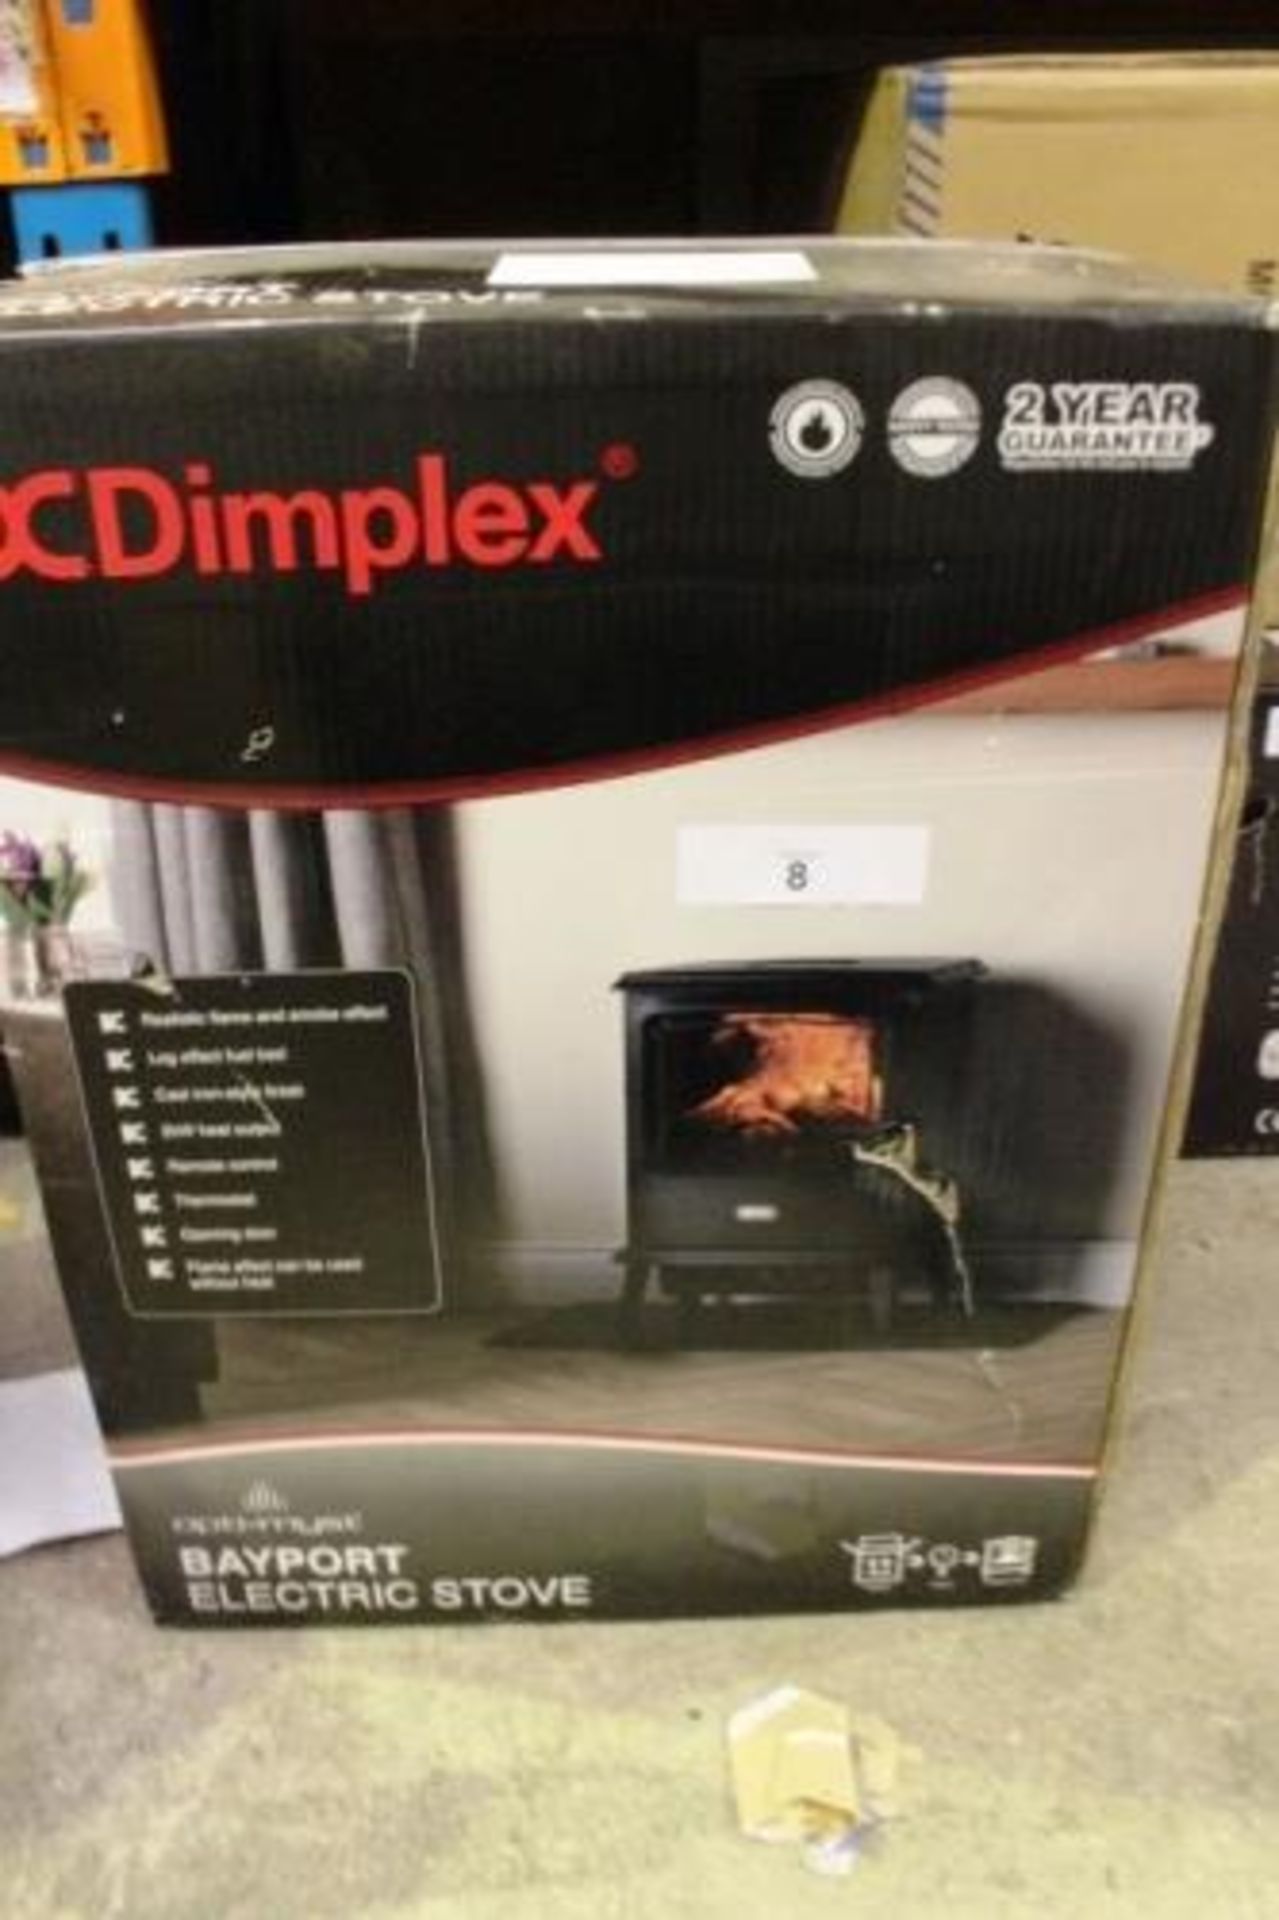 A Dimplex Opti-Myst Bay Port electric stove style fireplace, Ref: 24517D3F - Sealed new in box (